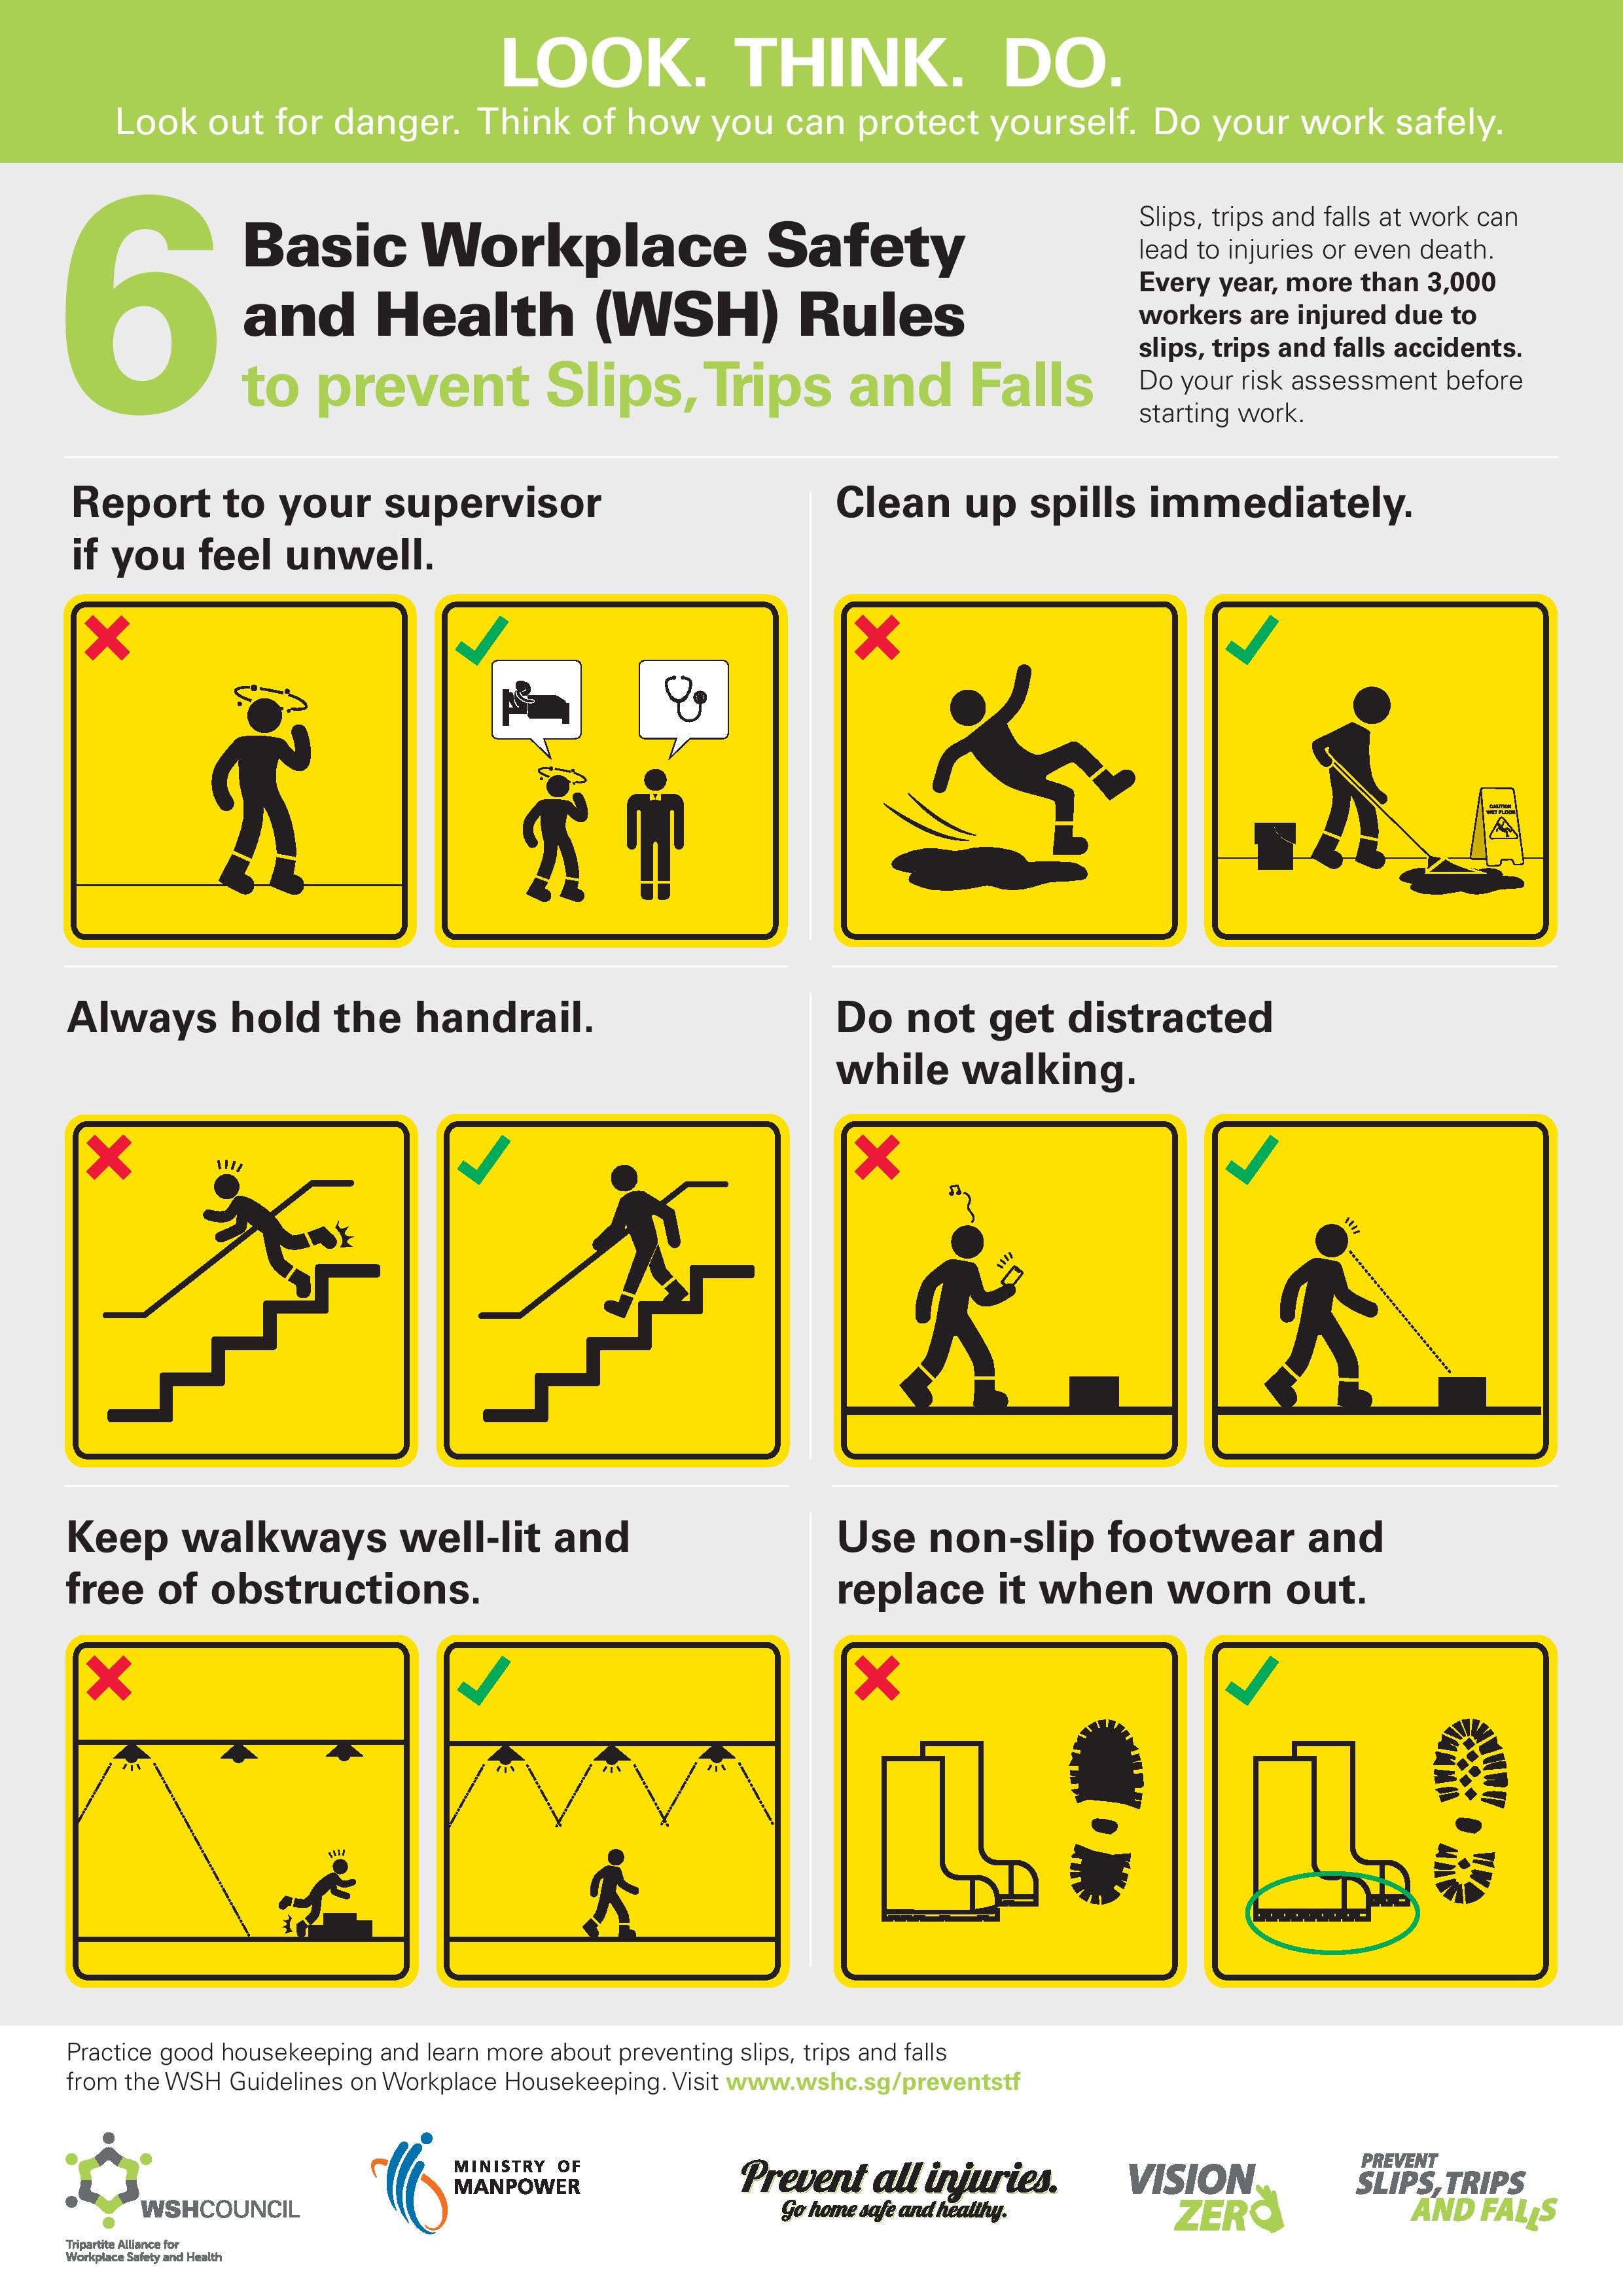 Look Think Do (Prevent Slips Trips and Falls)